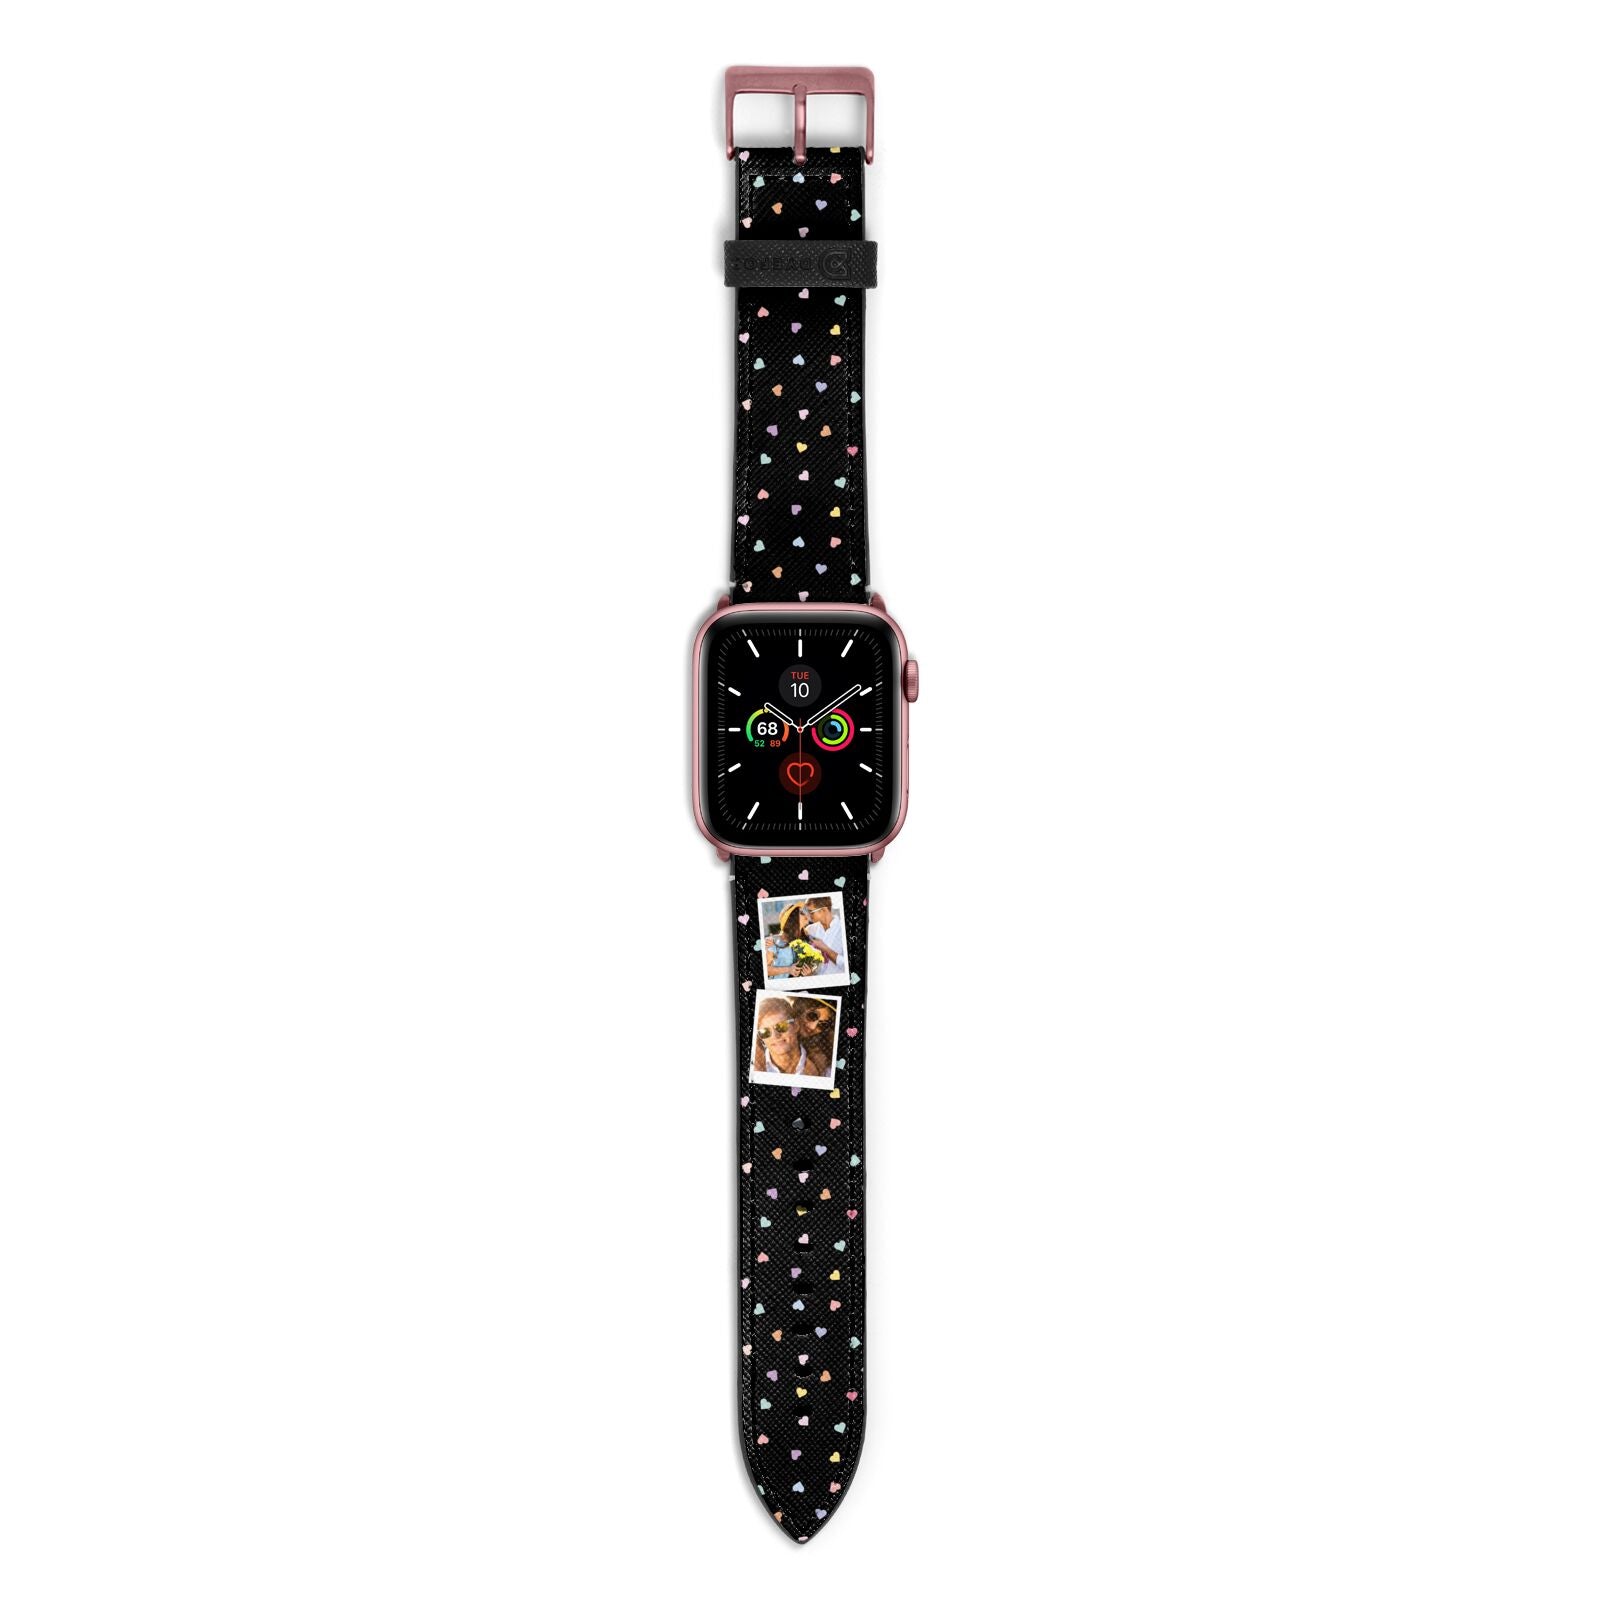 Confetti Heart Photo Apple Watch Strap with Rose Gold Hardware